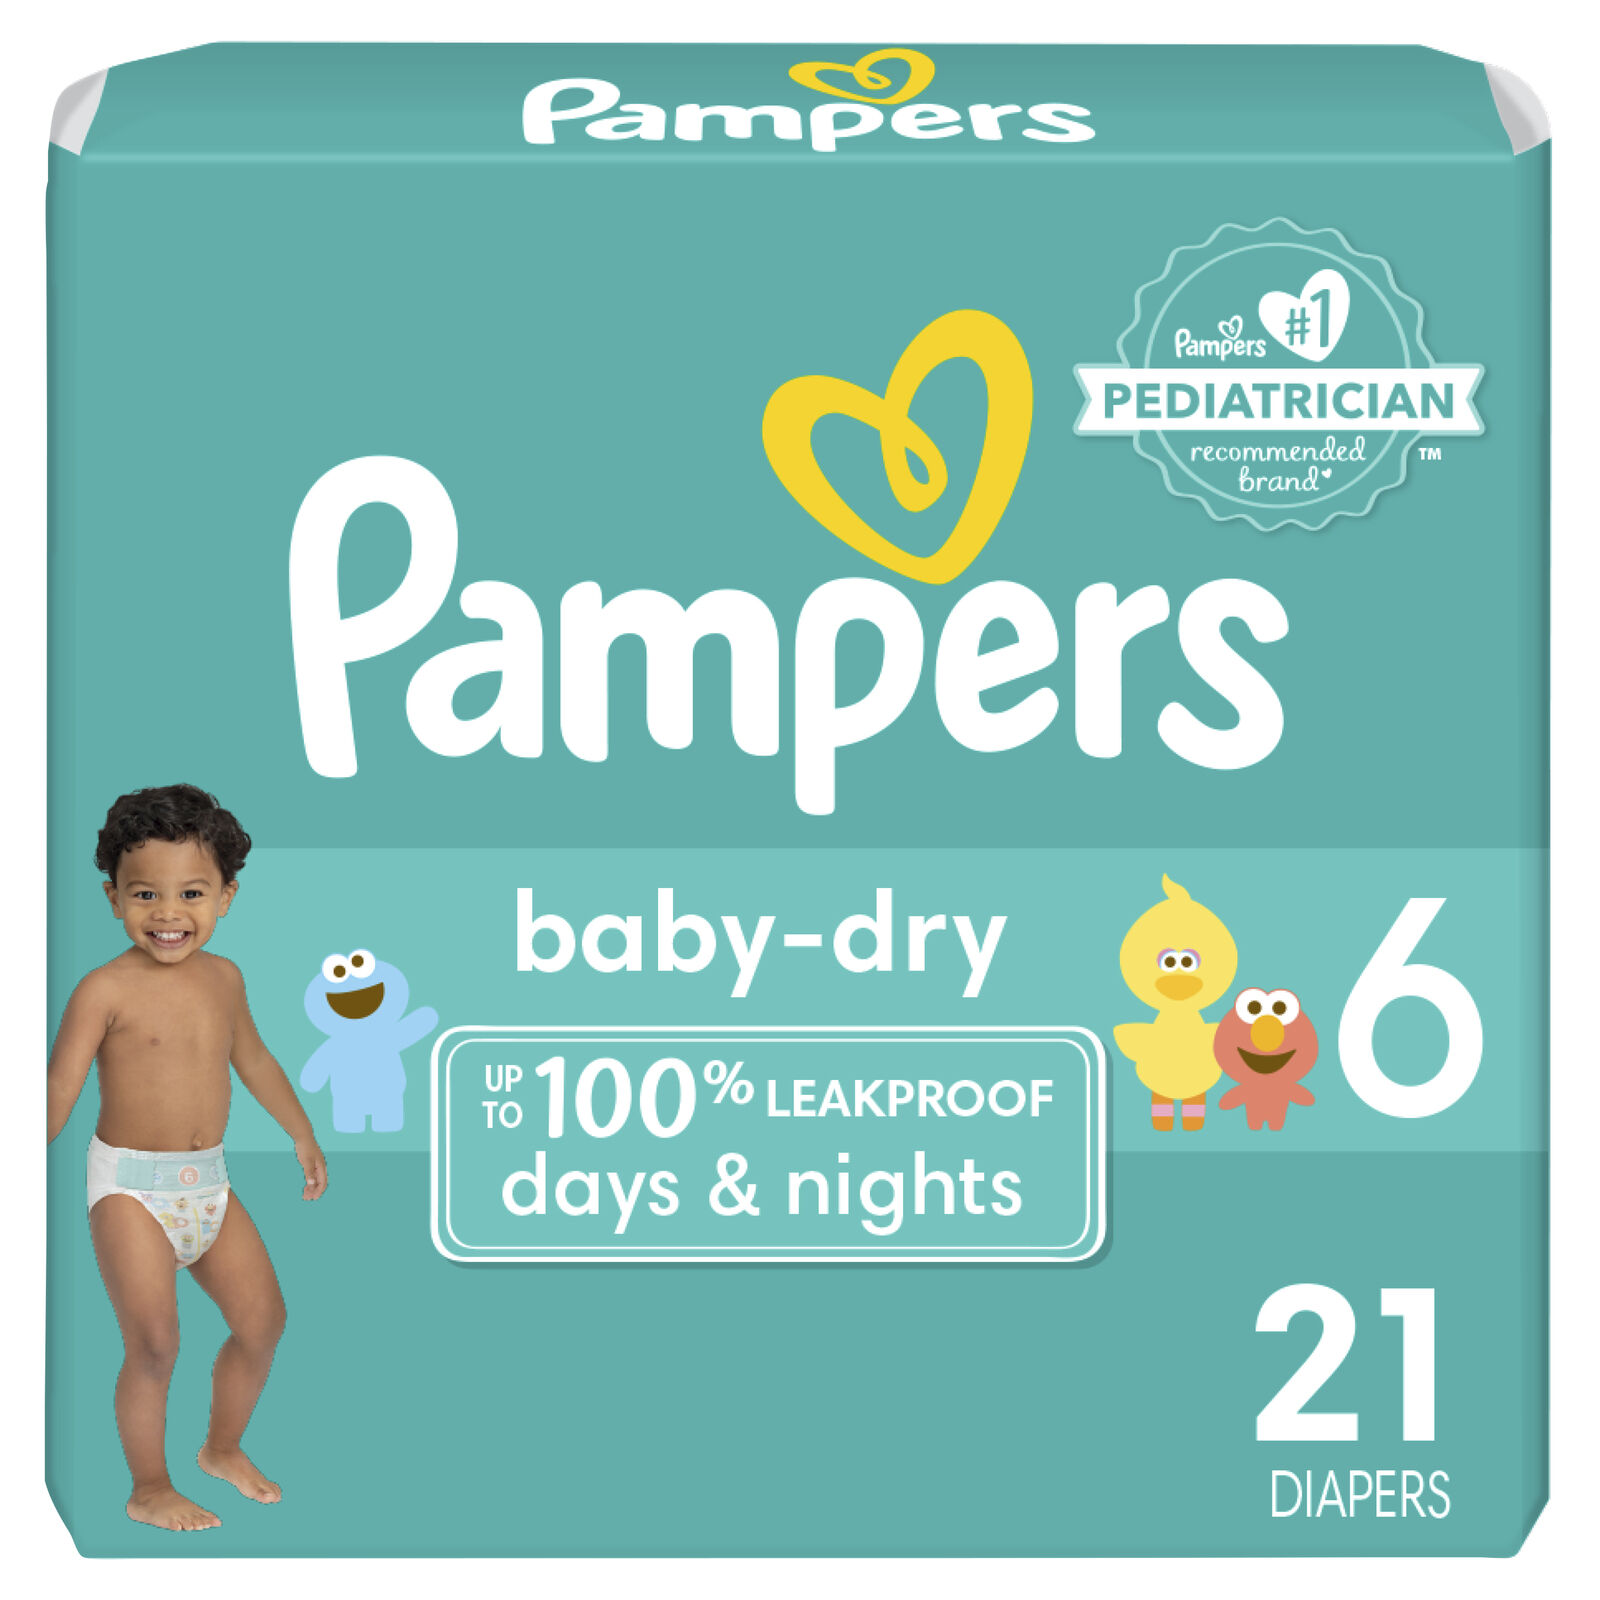 Pampers Size 6, 21 Count Diapers